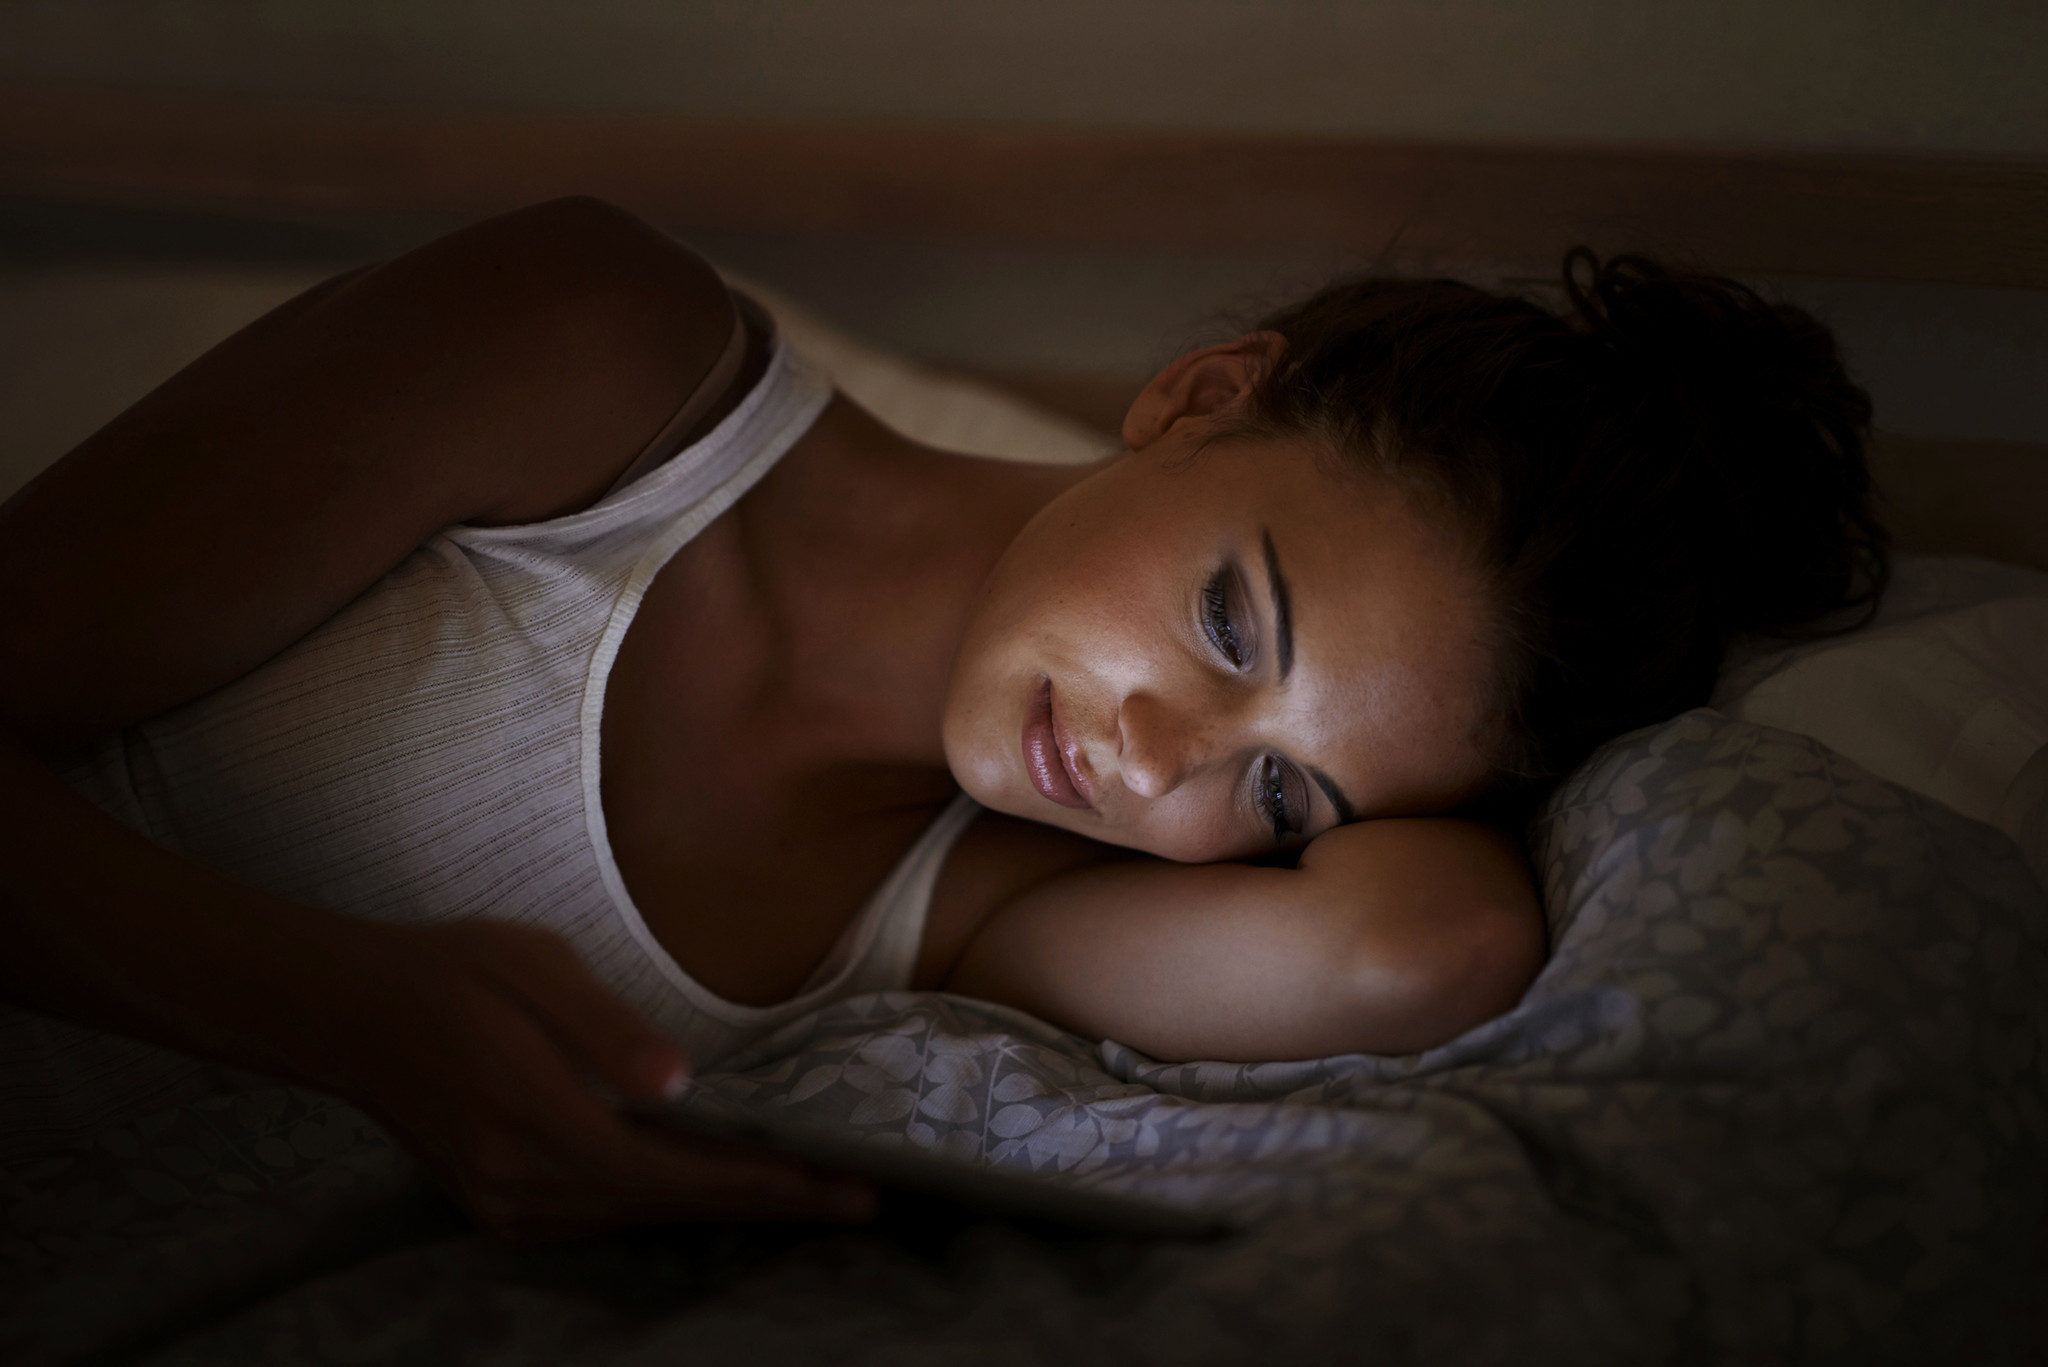 Trying to get a good night's sleep? Here are some tips